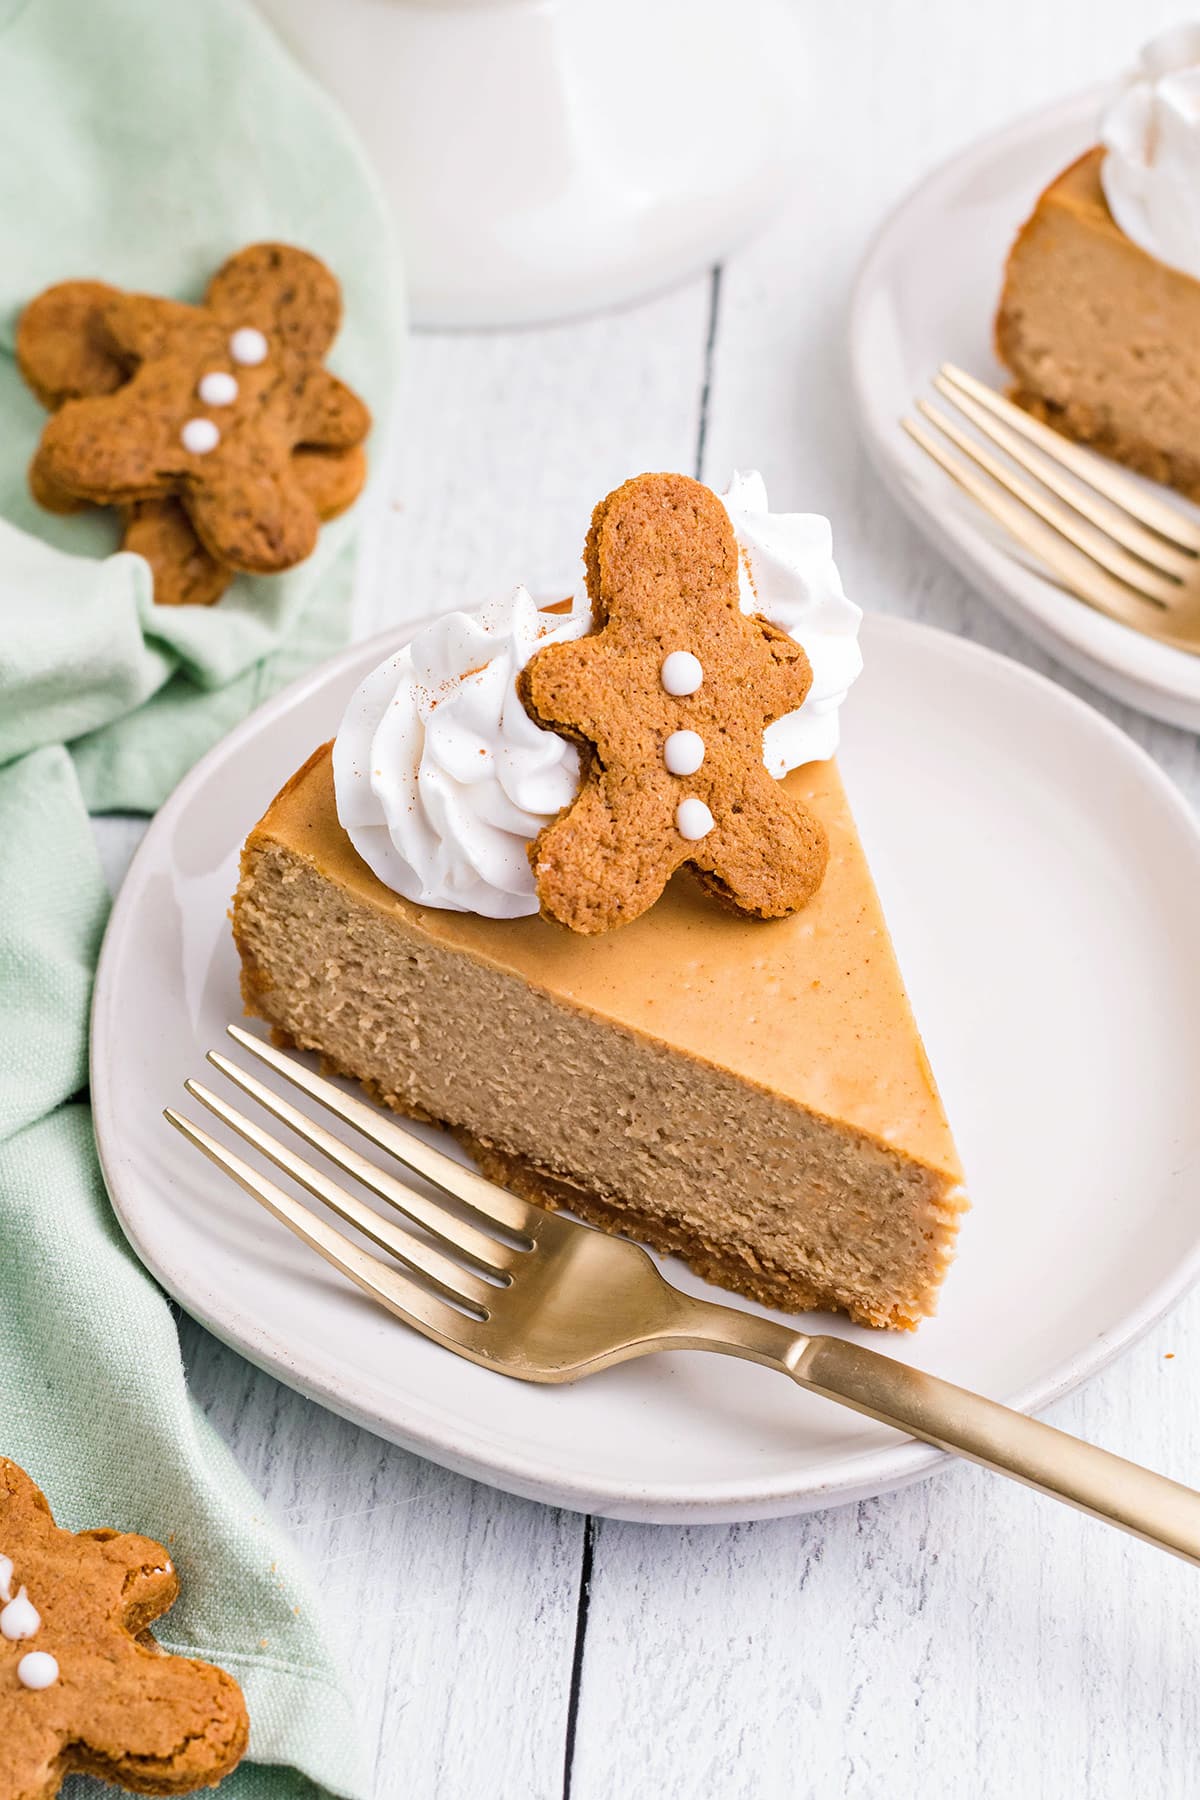 Slice of Gingerbread Cheesecake on a white plate next to a fork.